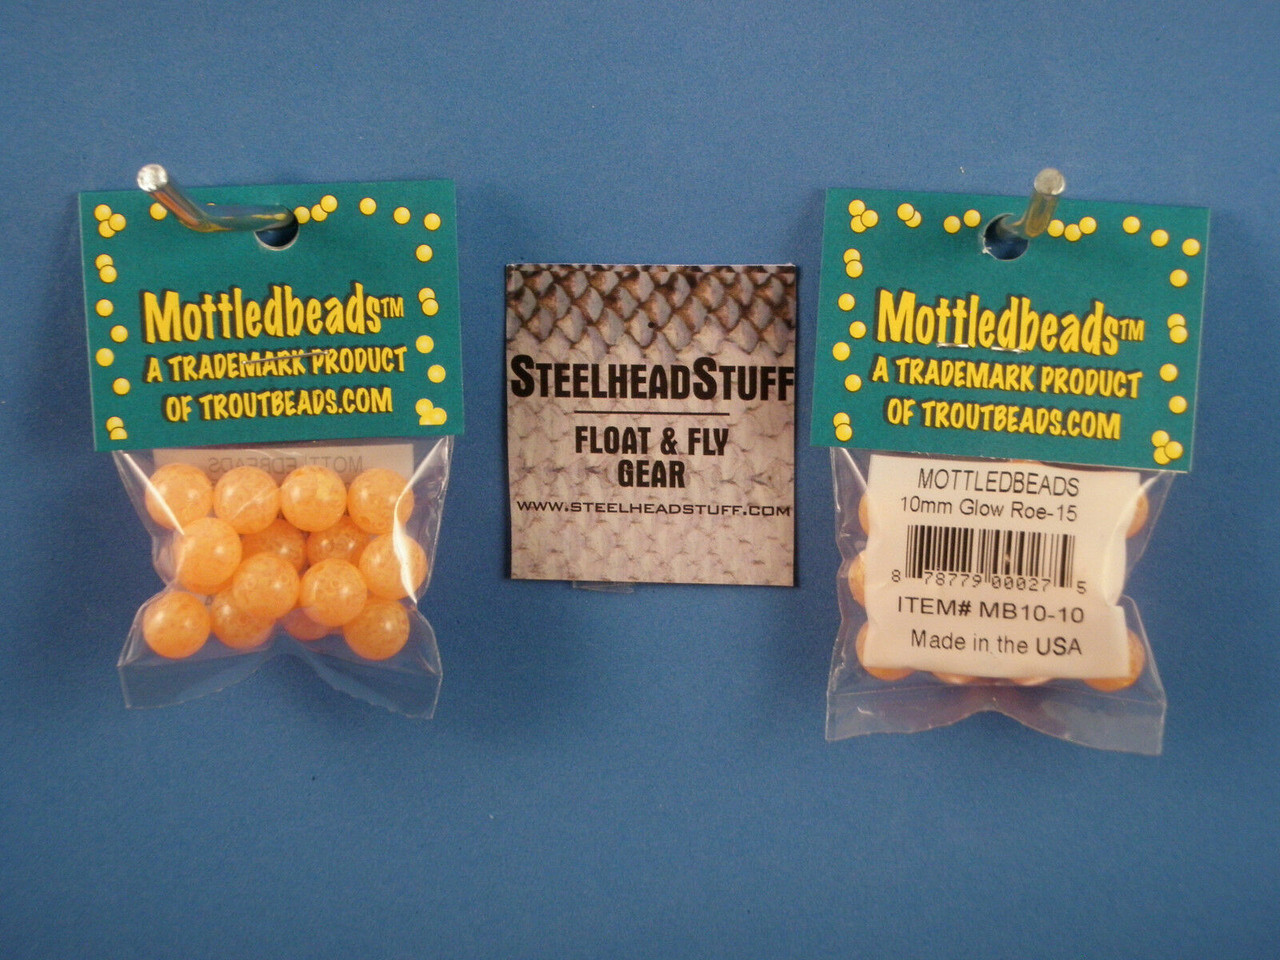 Trout Beads - Troutbeads size 12 - 25 pack BeadHooks